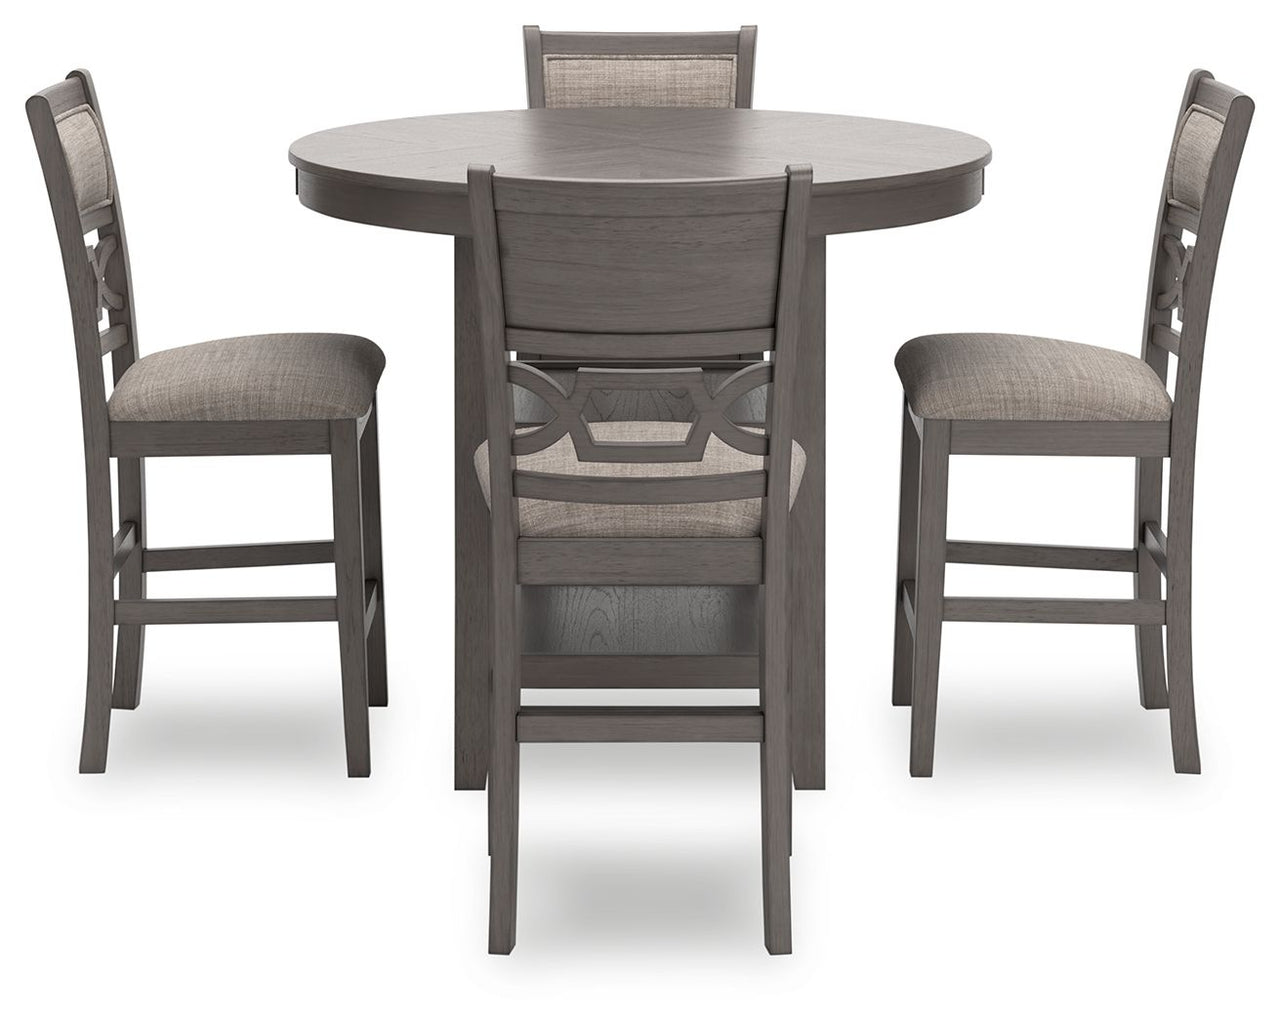 Wrenning - Gray - Drm Counter Table Set (Set of 5) - Tony's Home Furnishings